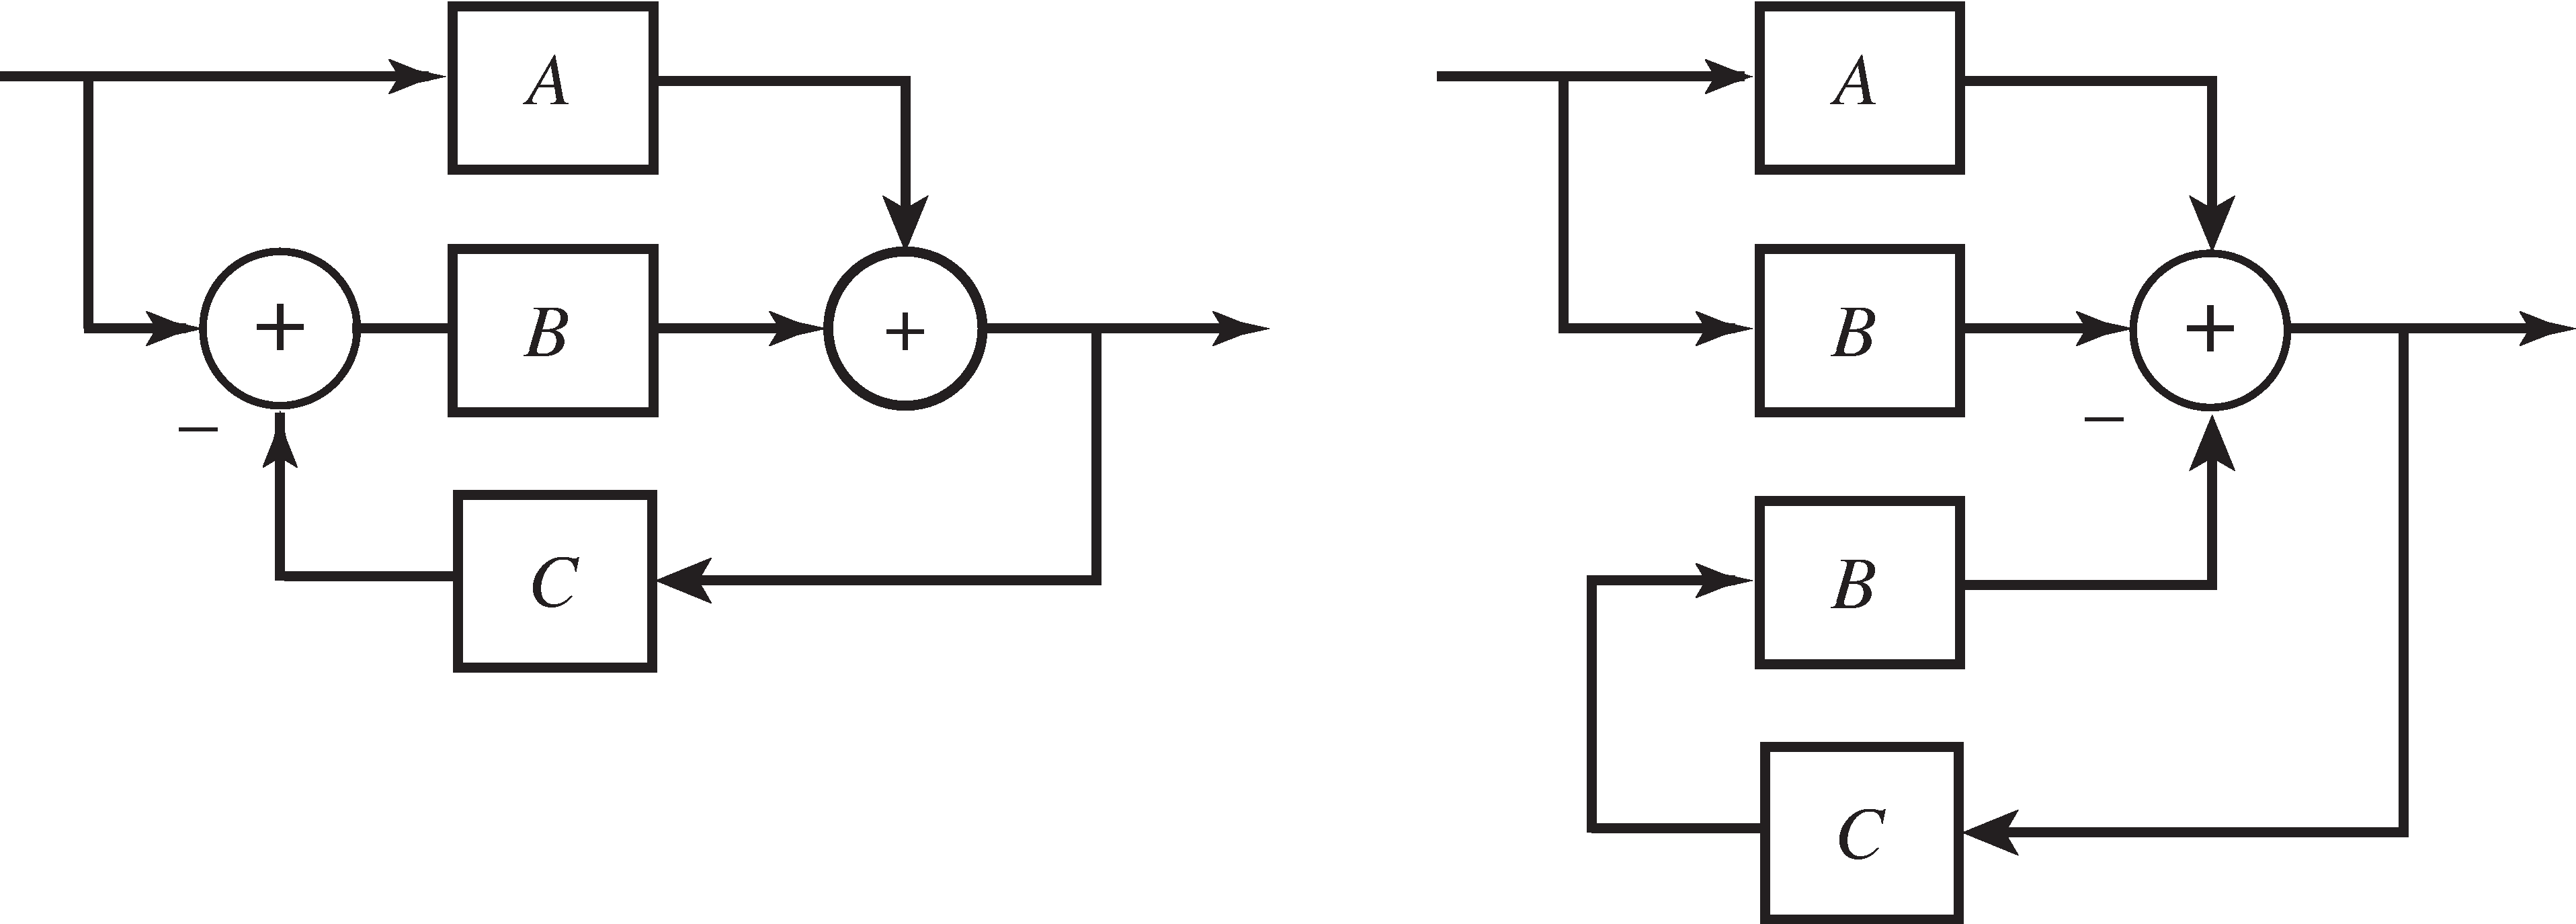 The top block diagram with overlapping loops can be redrawn as the bottom split diagram.